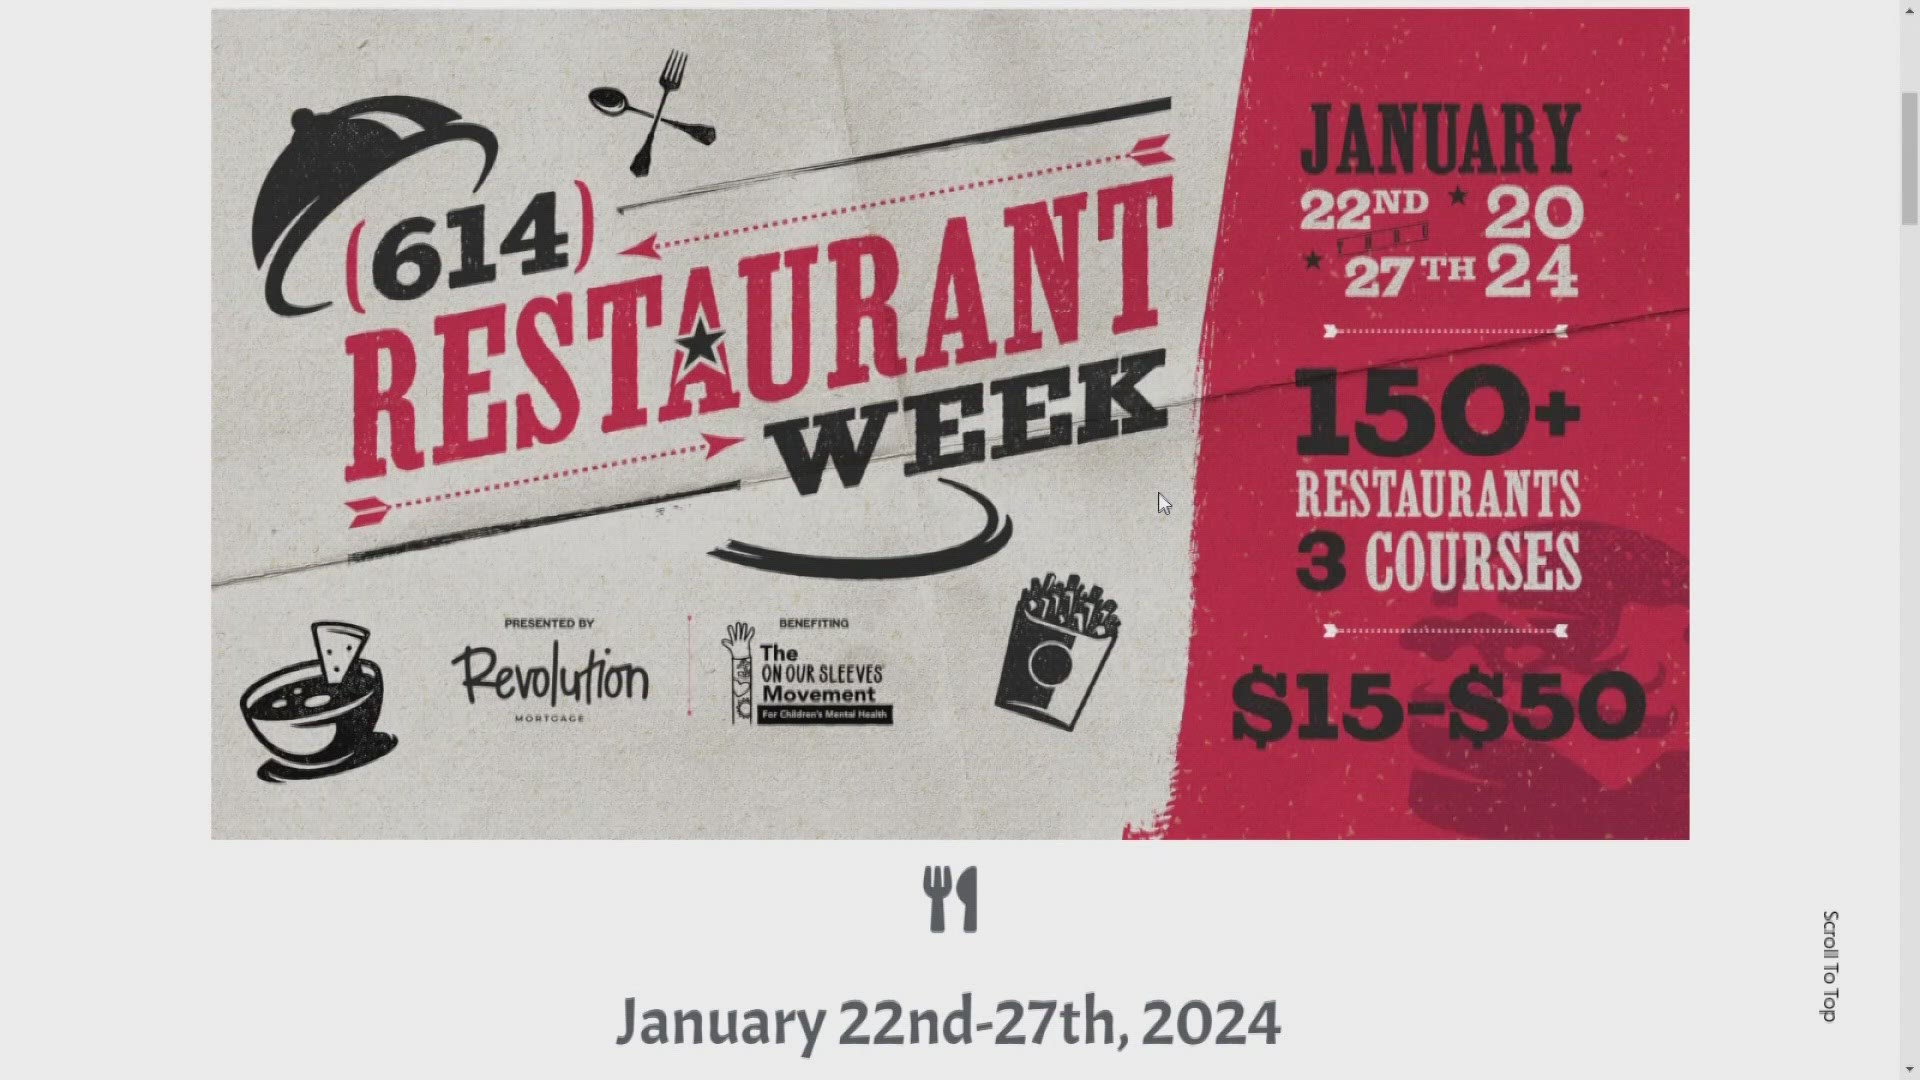 In this special week-long event, taking place Jan. 22-27, restaurants around Columbus will be offering discounted, three-course meals.